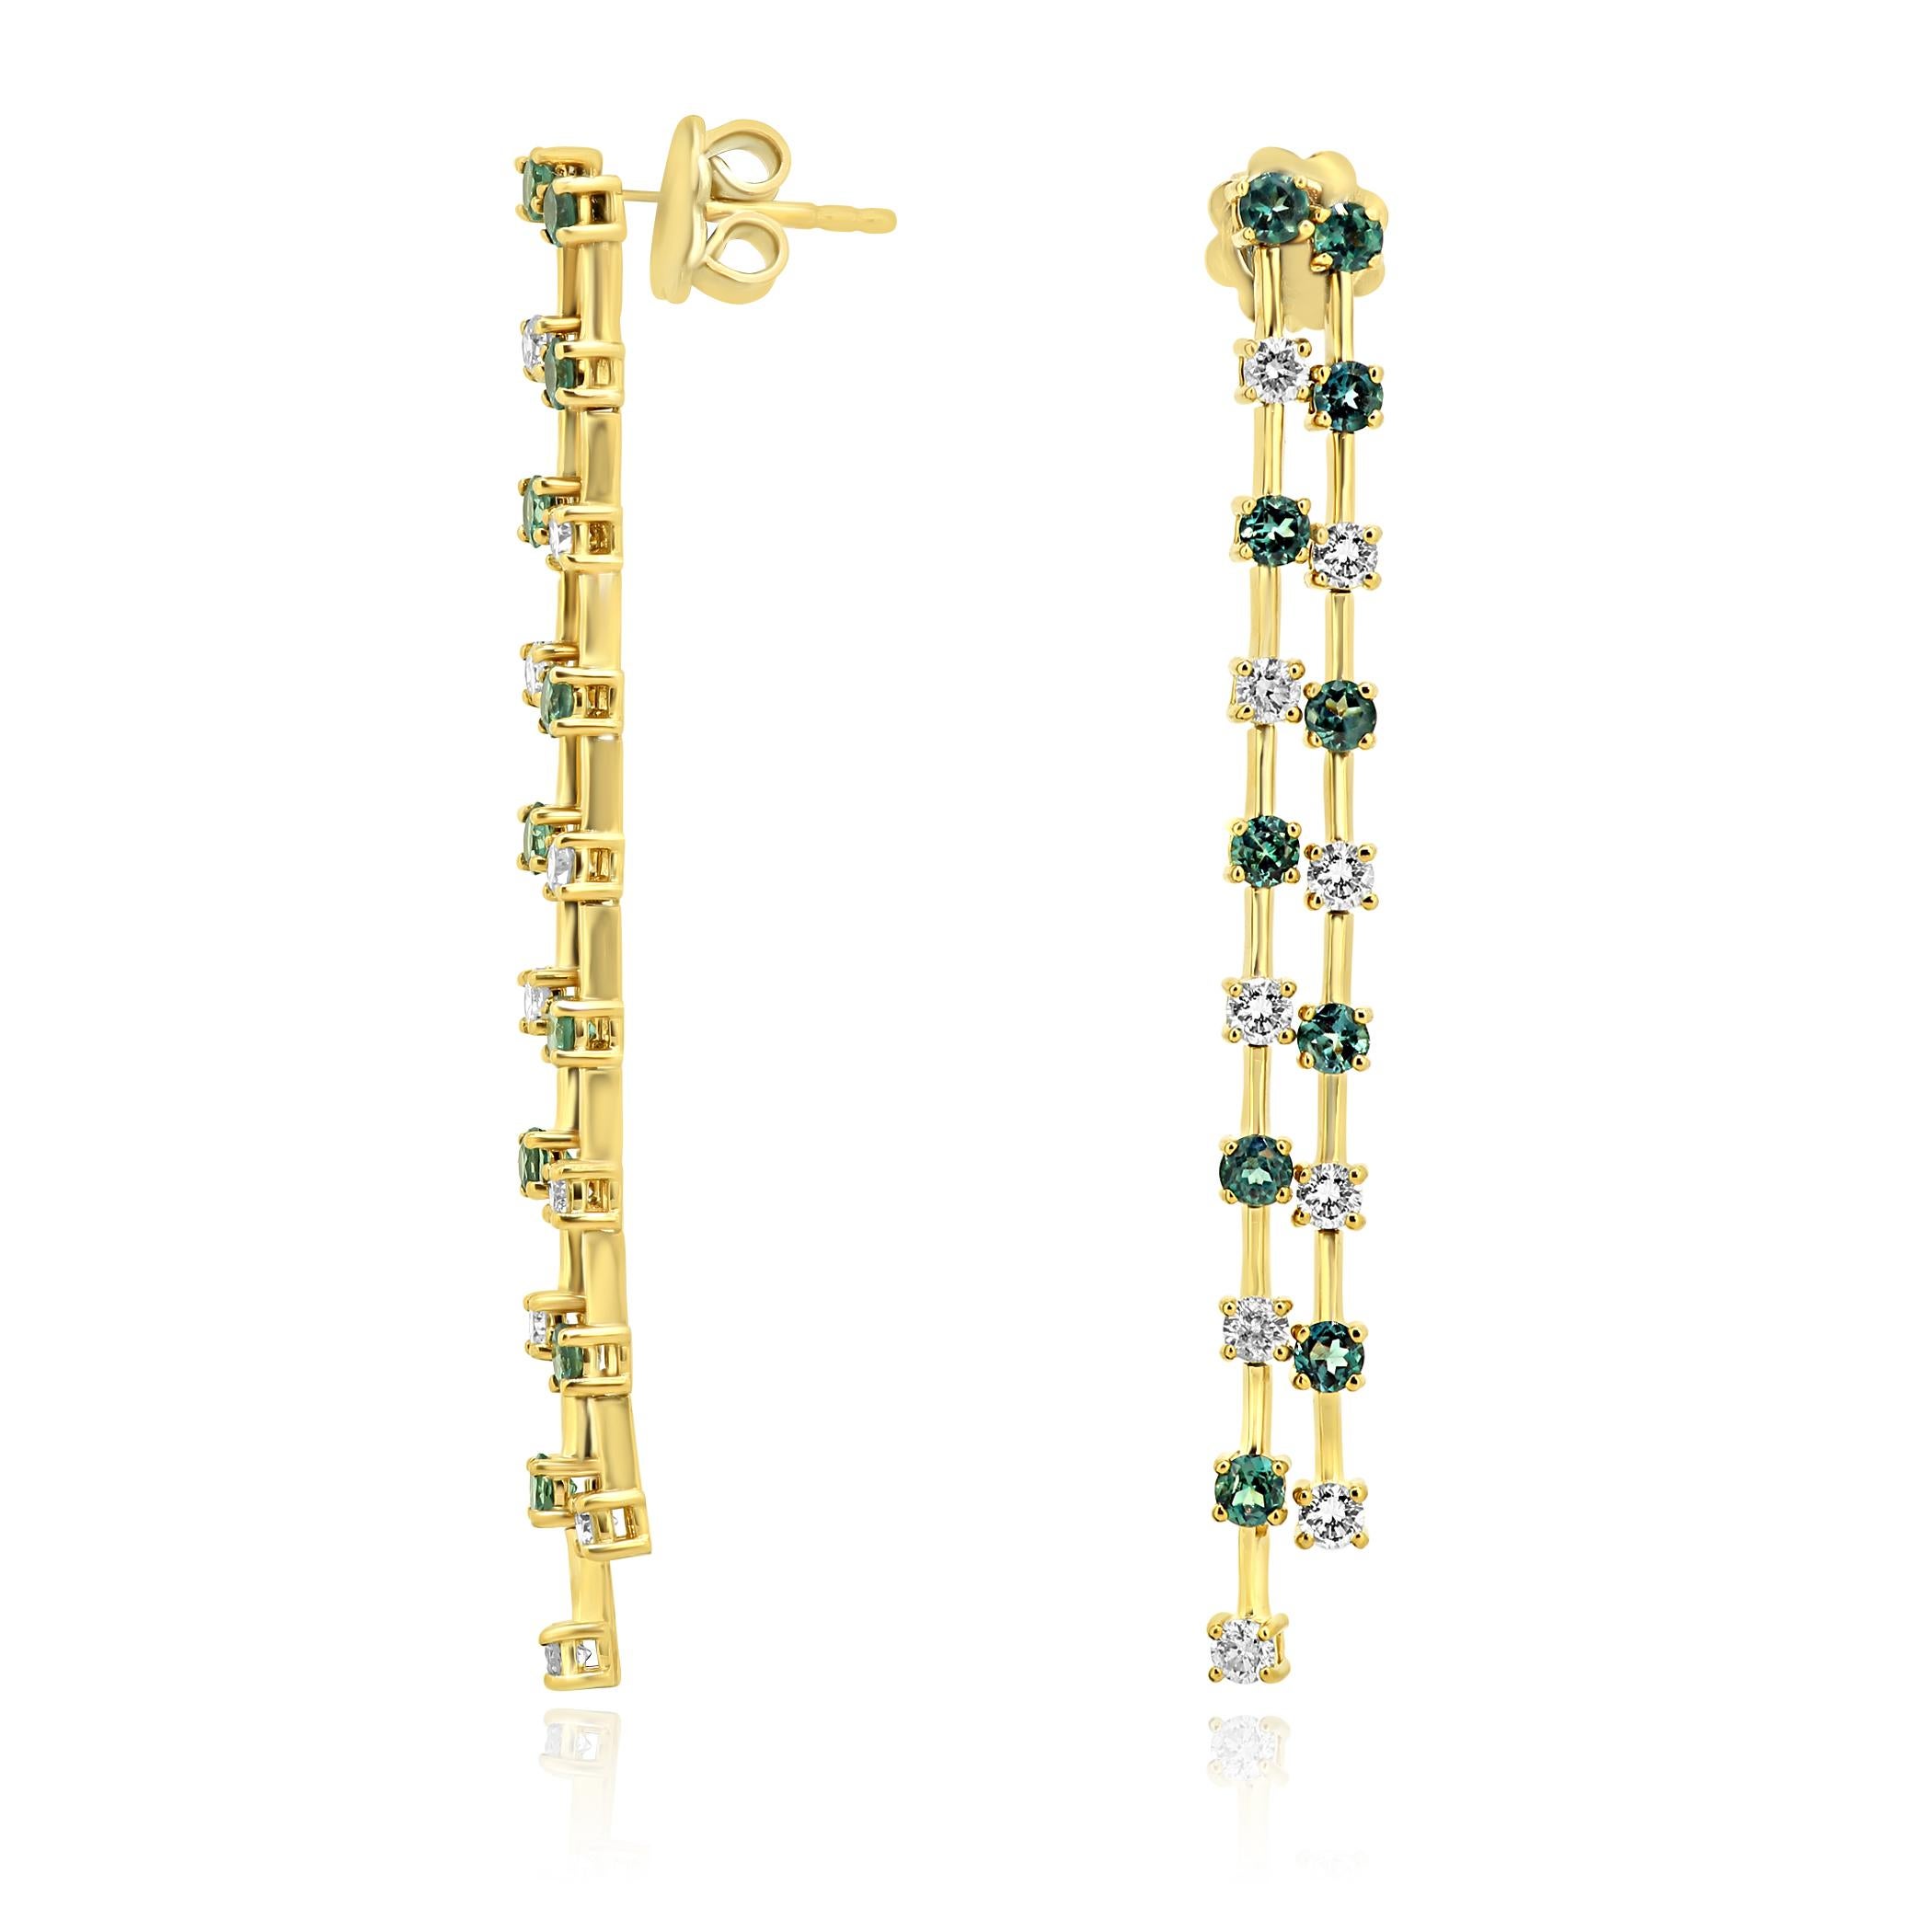 Stylish Long Dangling Earring in 14K Yellow Gold Set with Natural Alexandrite Round 1.83 Carat and White Diamond Round 1.06 Carat.

MADE IN USA
Total Stone Weight 2.89 Carat